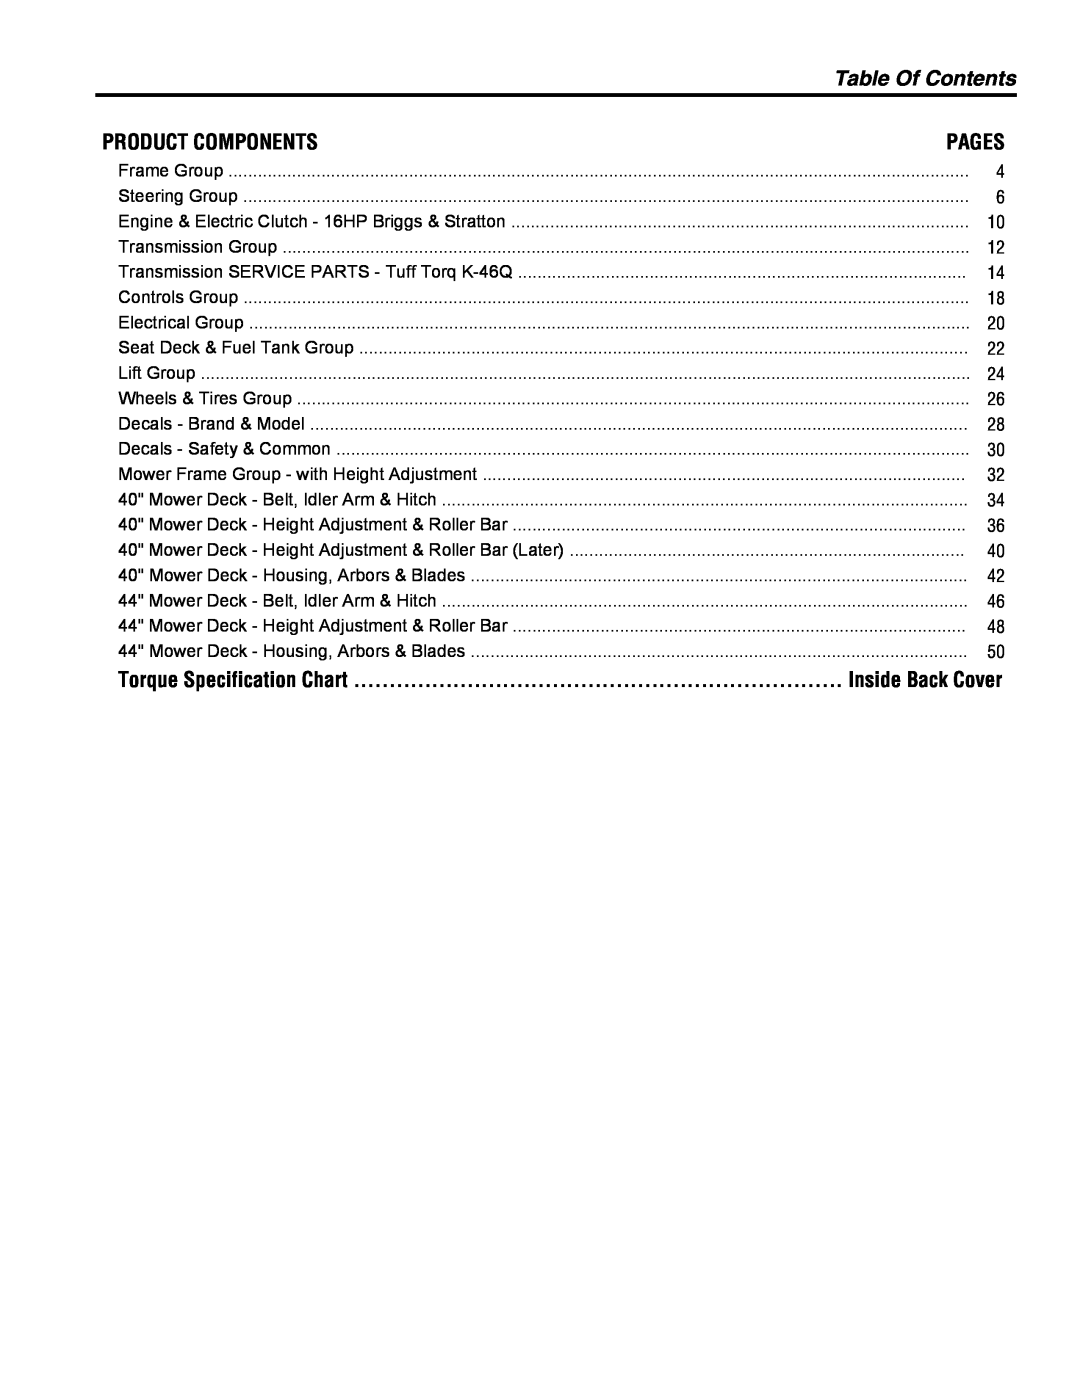 Snapper Lancer / 4400 manual Table Of Contents, Product Components, Pages, Torque Specification Chart, Inside Back Cover 